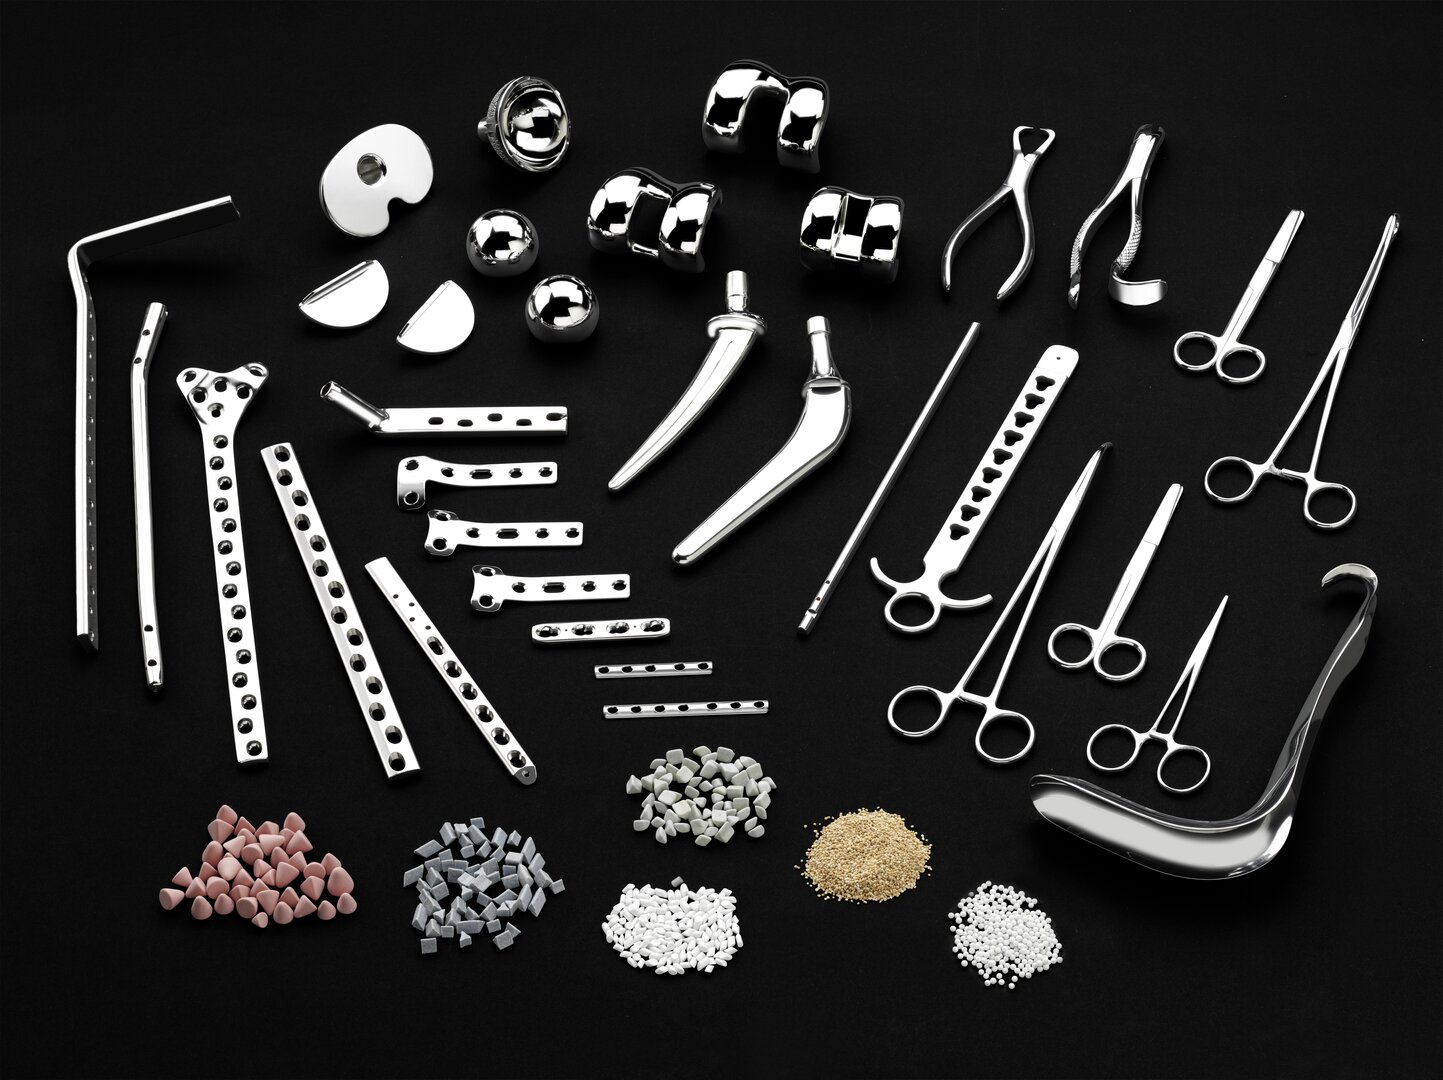 Medical parts overview